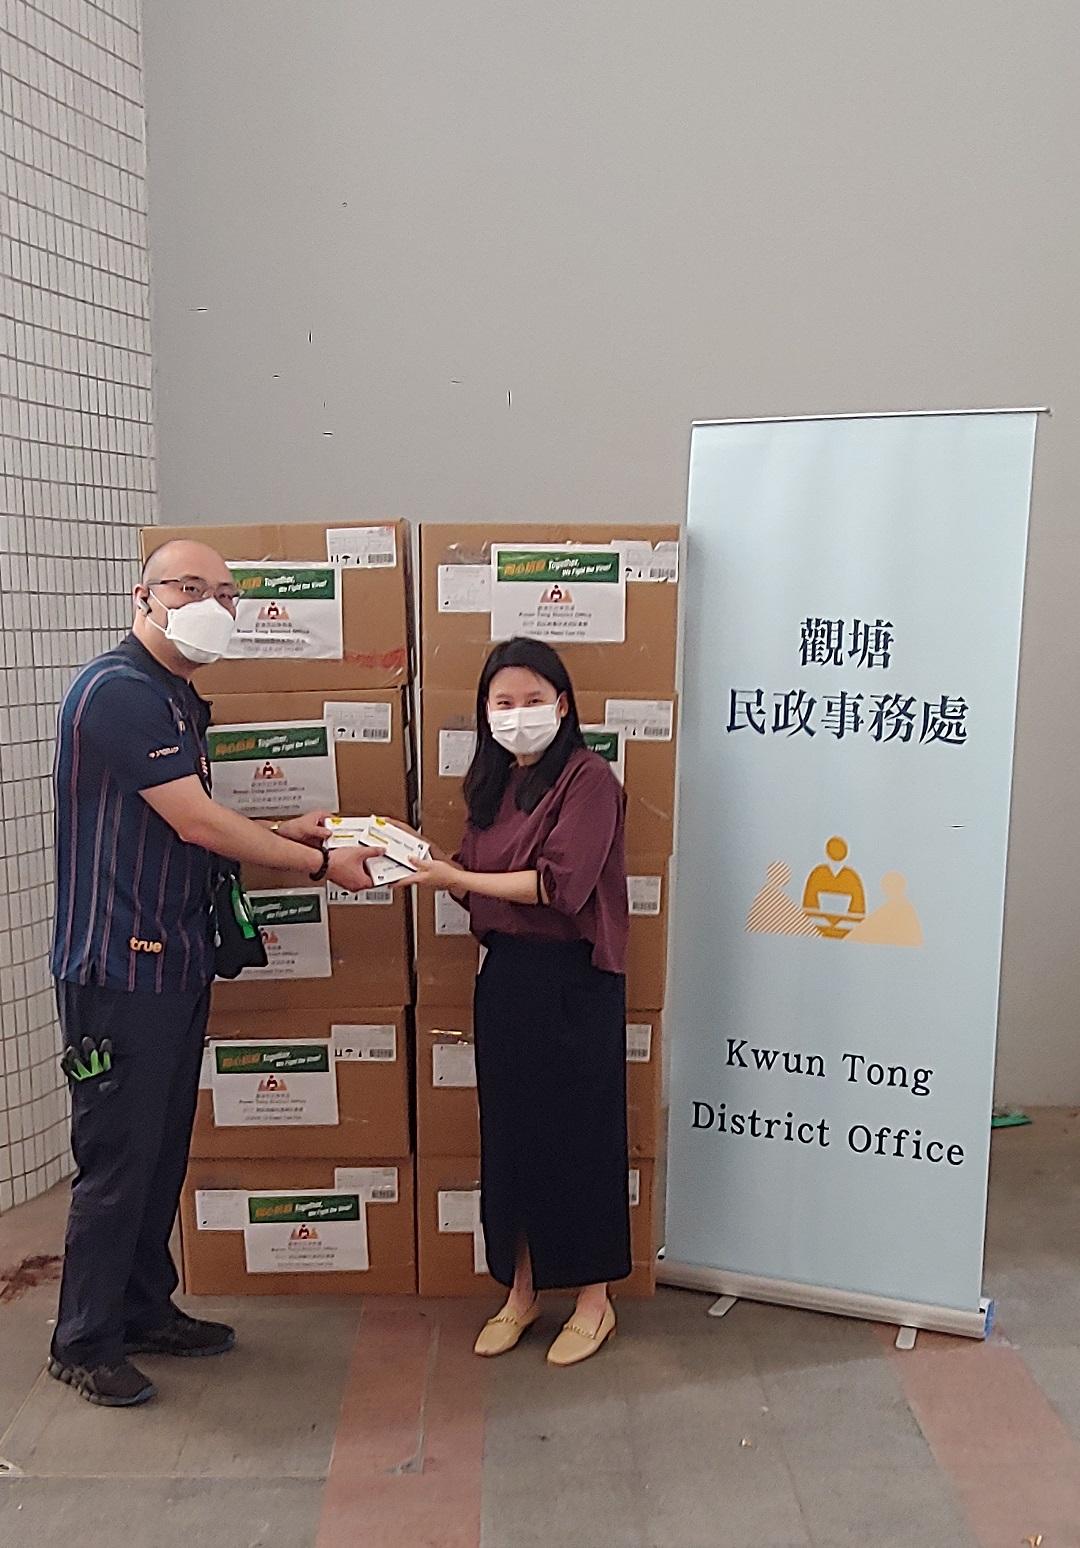 The Kwun Tong District Office today (May 19) distributed COVID-19 rapid test kits to households, cleansing workers and property management staff living and working in Choi Ha Estate for voluntary testing through the property management company.